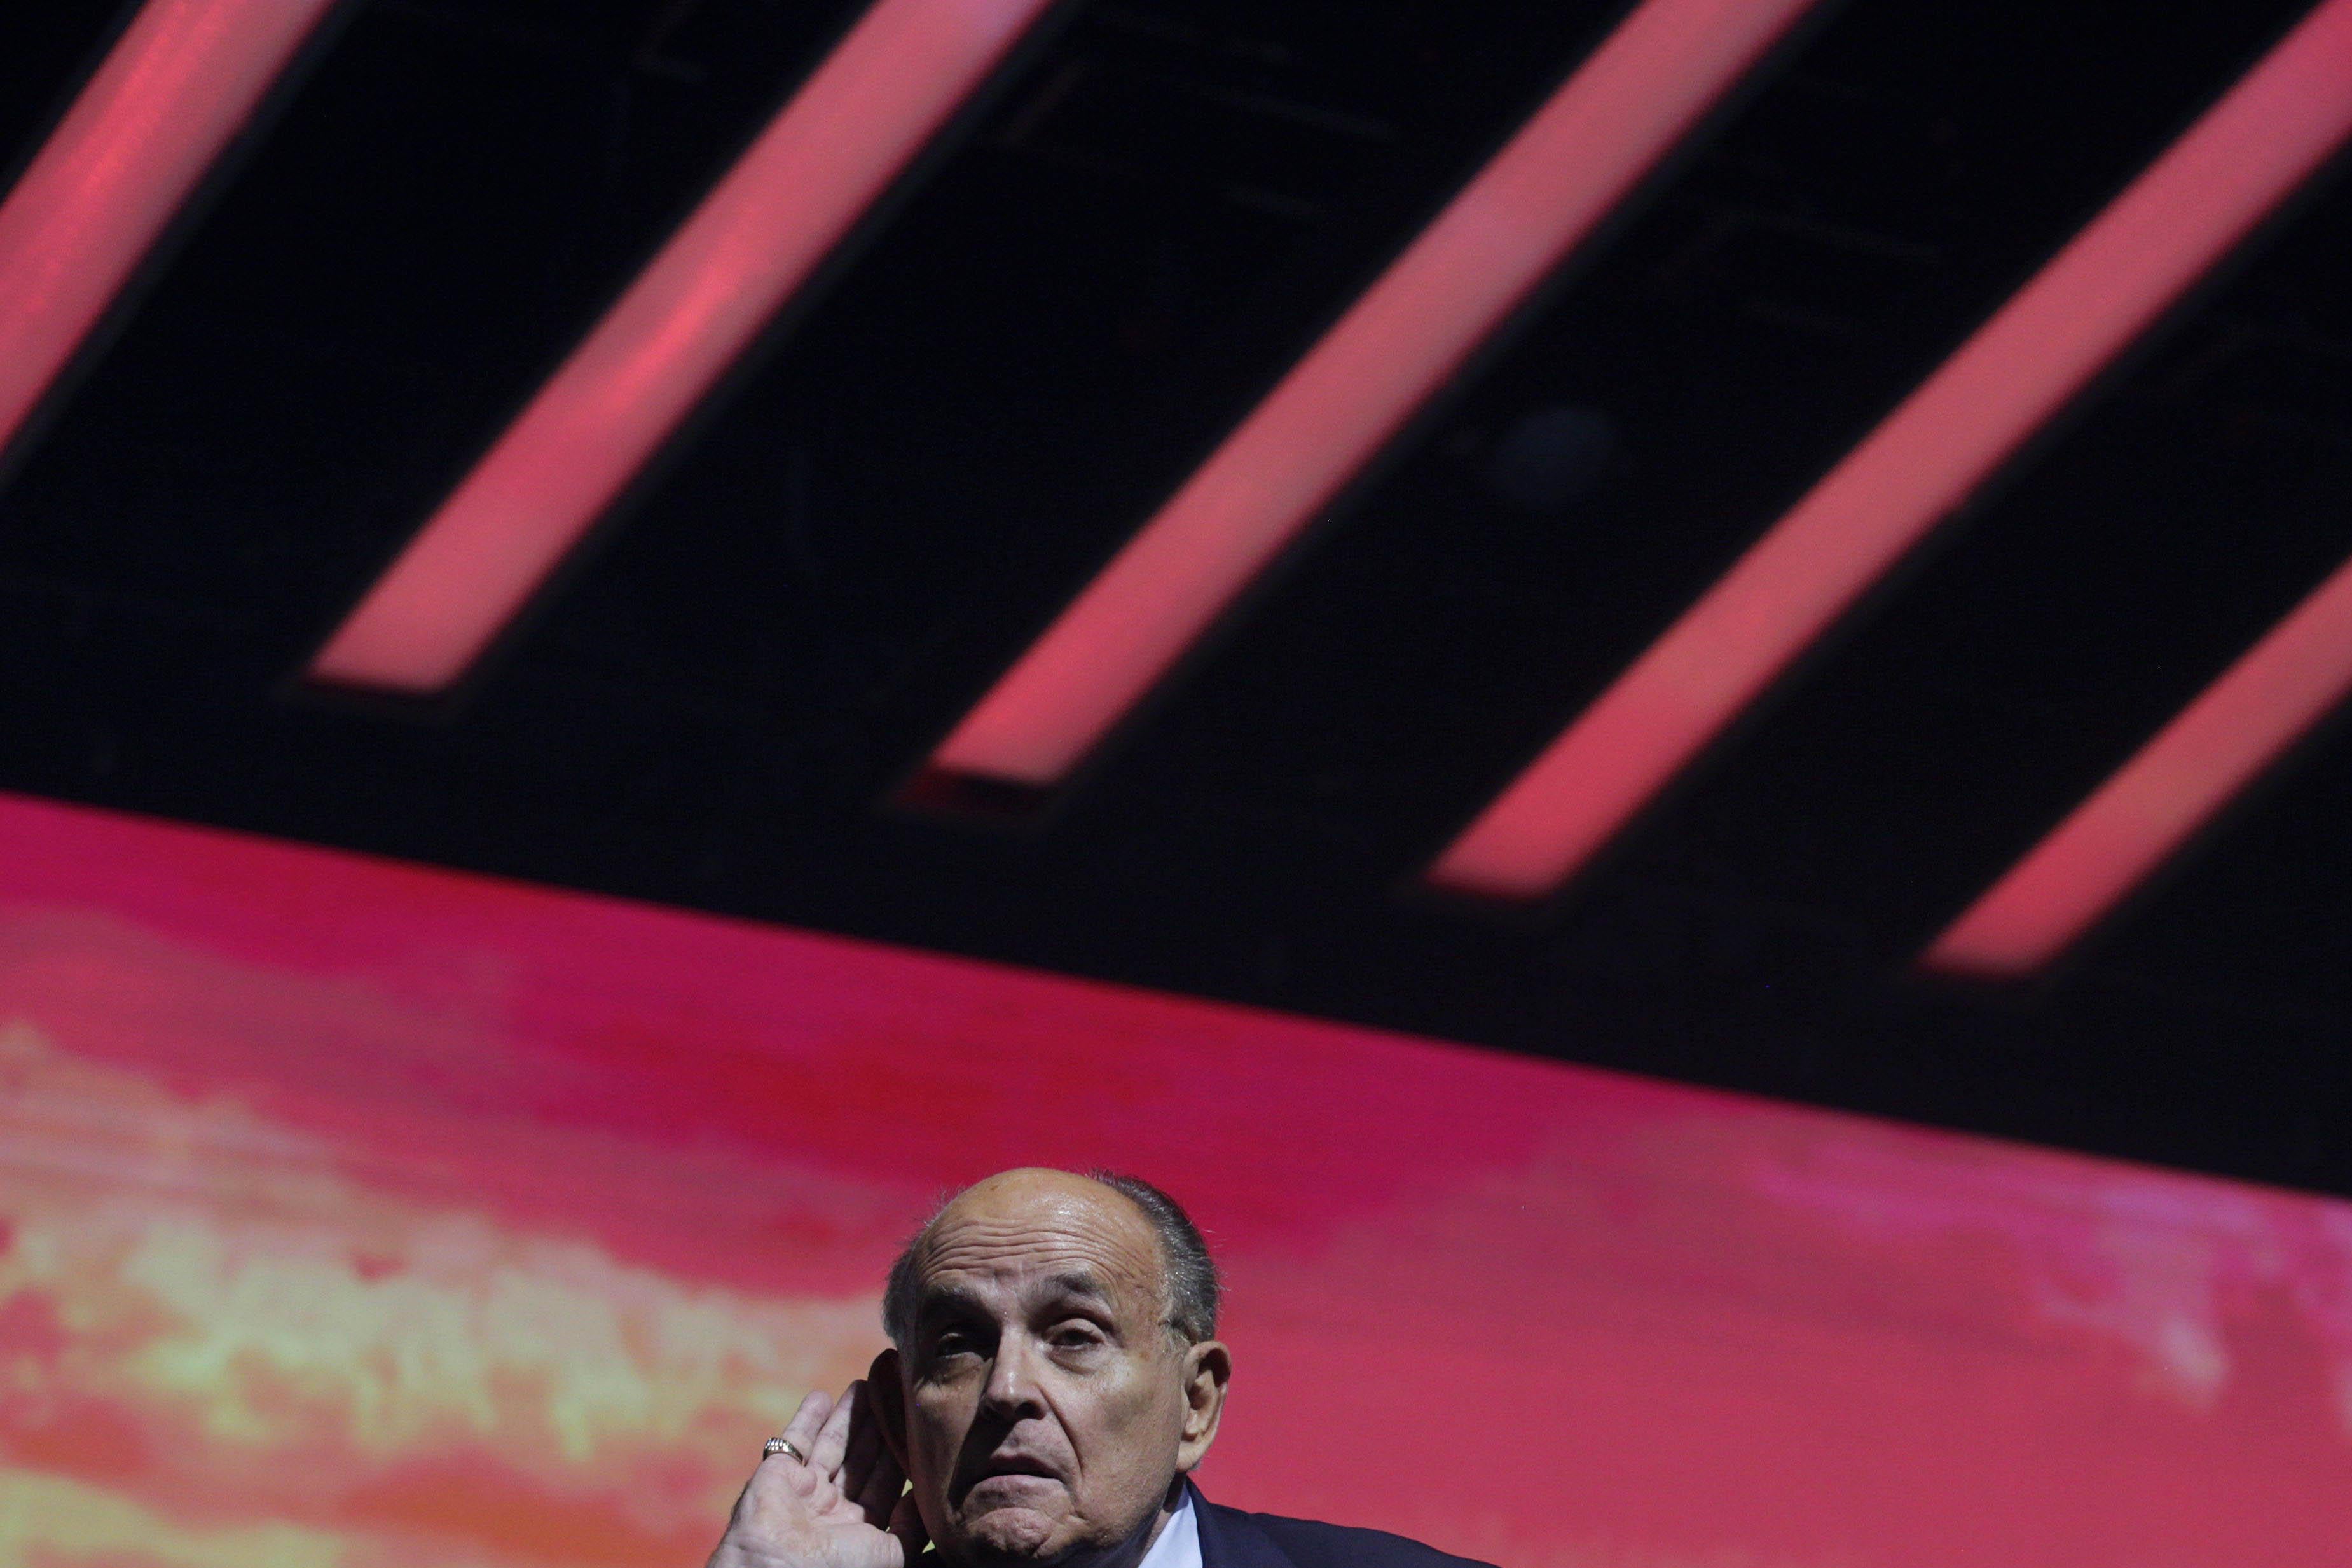 Rudy Giuliani addresses the crowd at the Turning Point USA Student Action Summit on December 19, 2019 in Palm Beach, Florida.